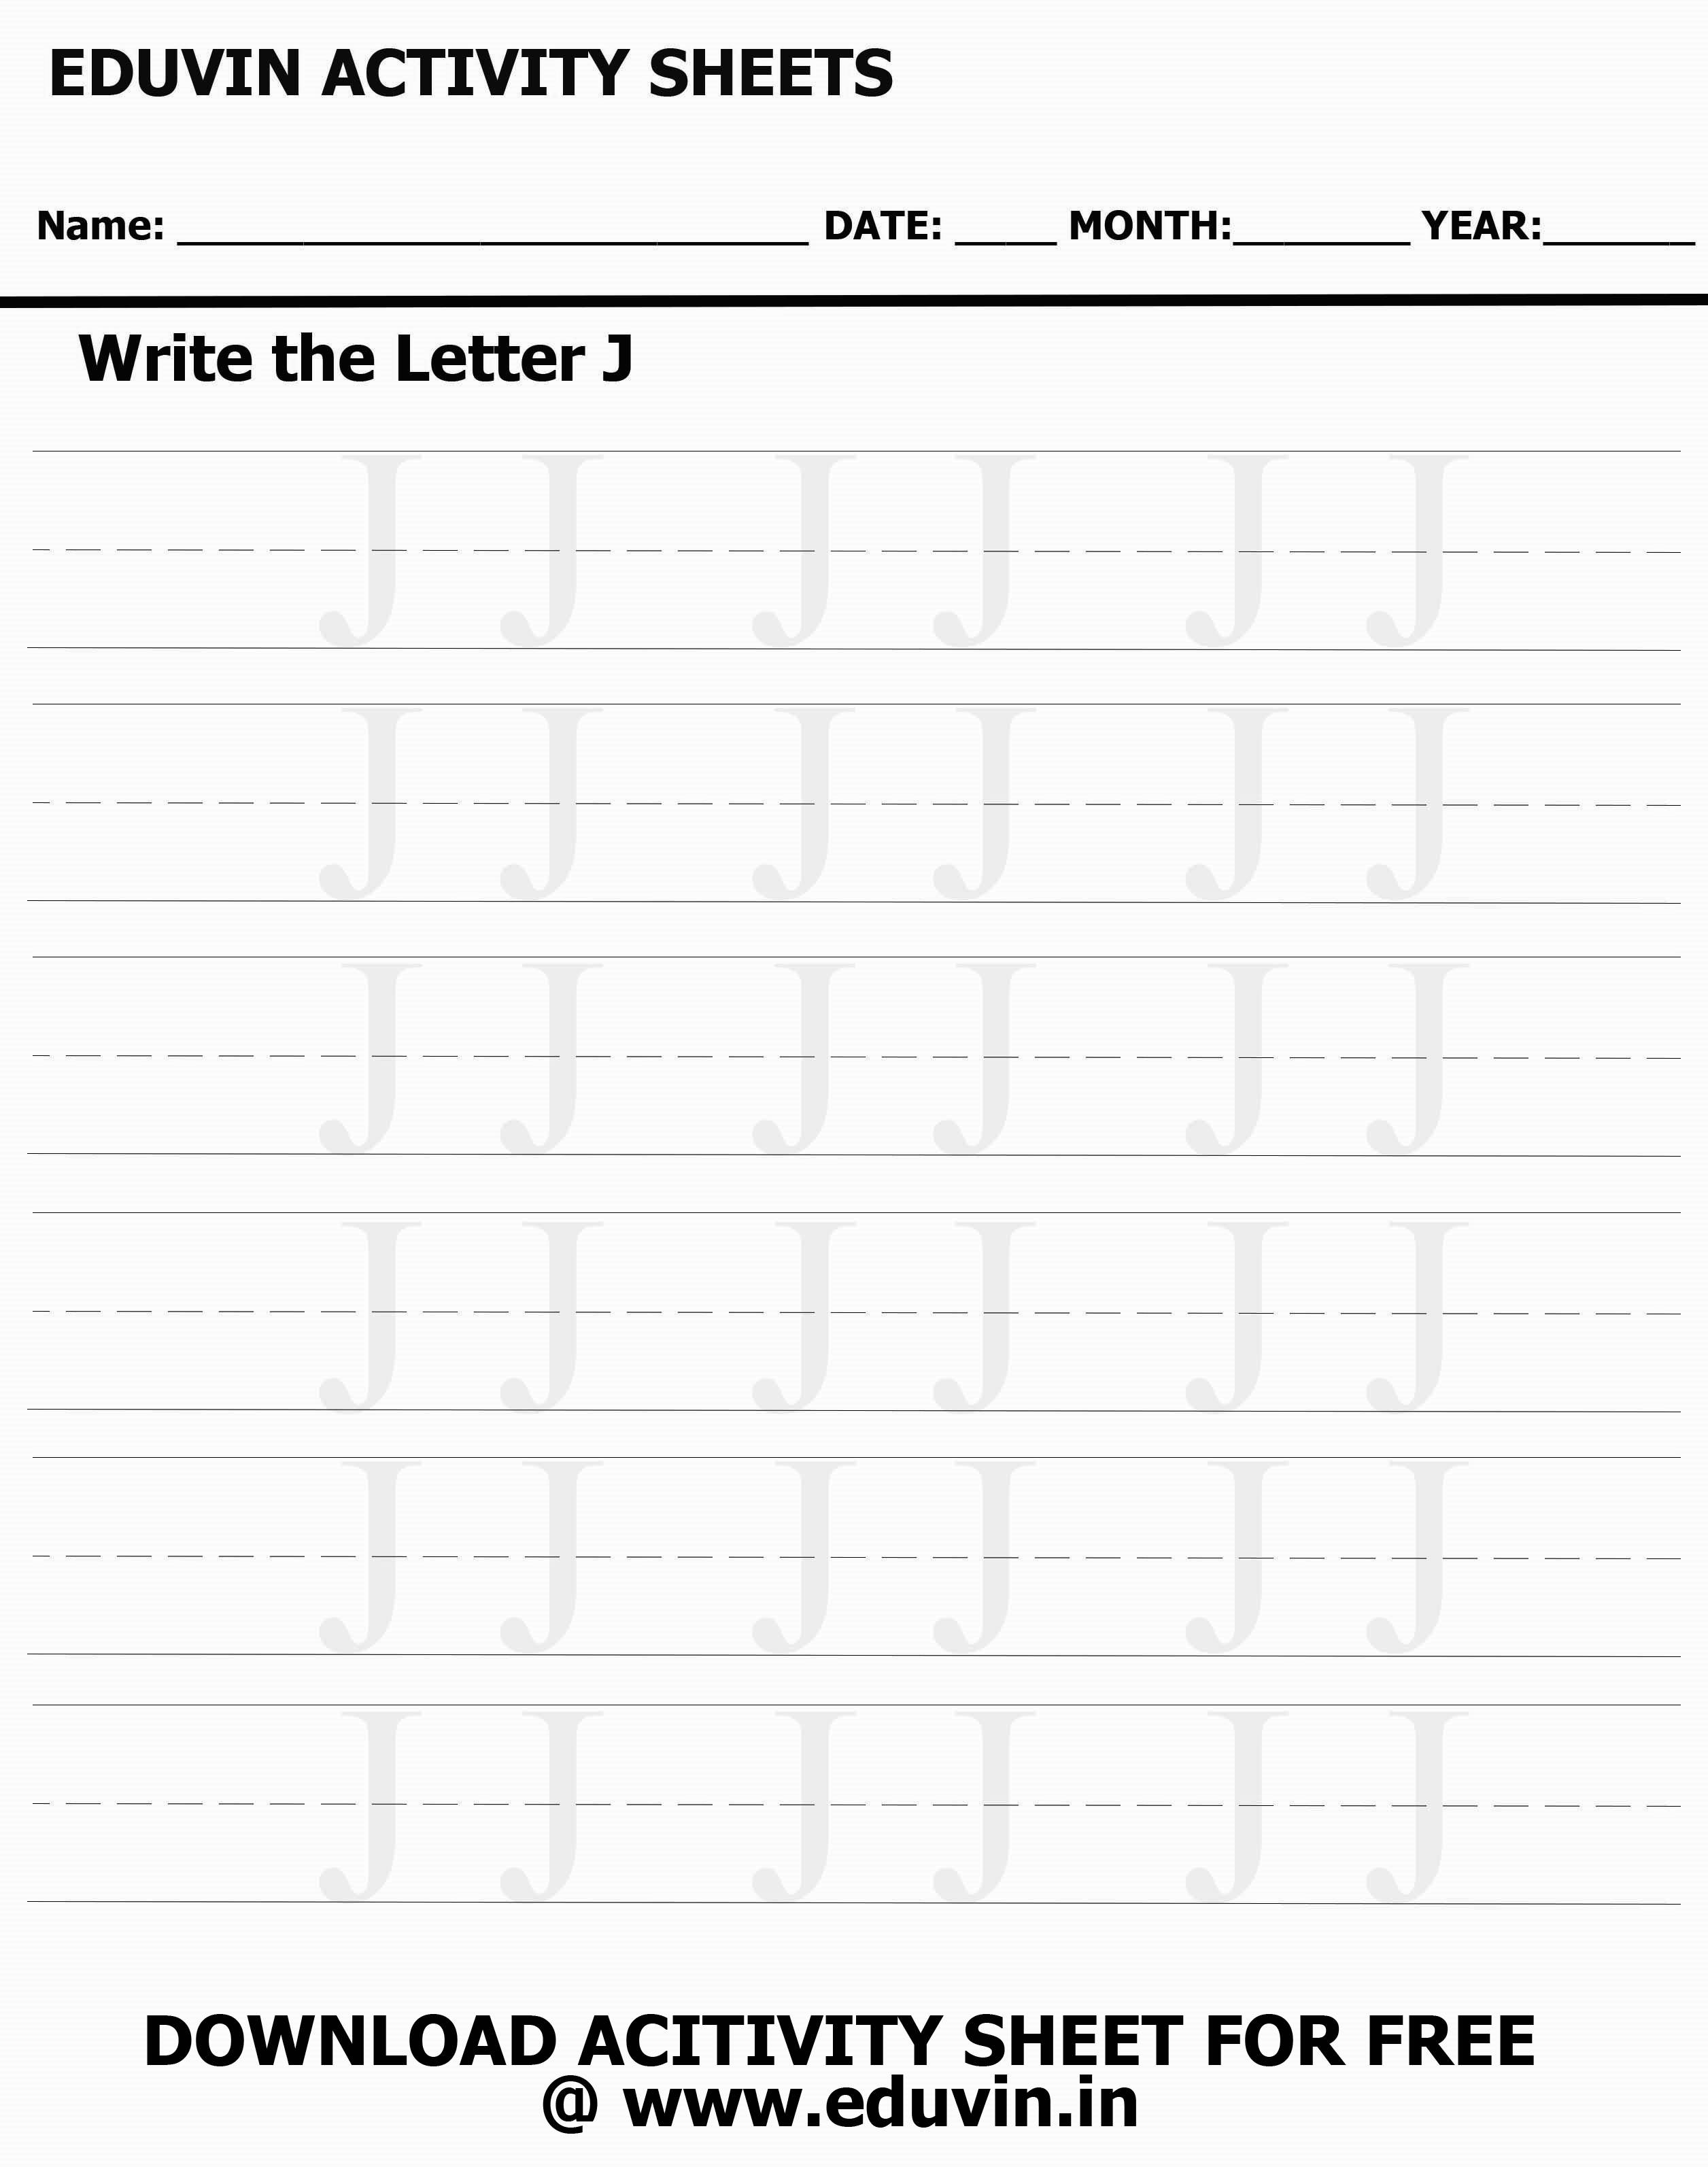 LETTER J Activity Sheet For Tracing and Letter Writing For Kids